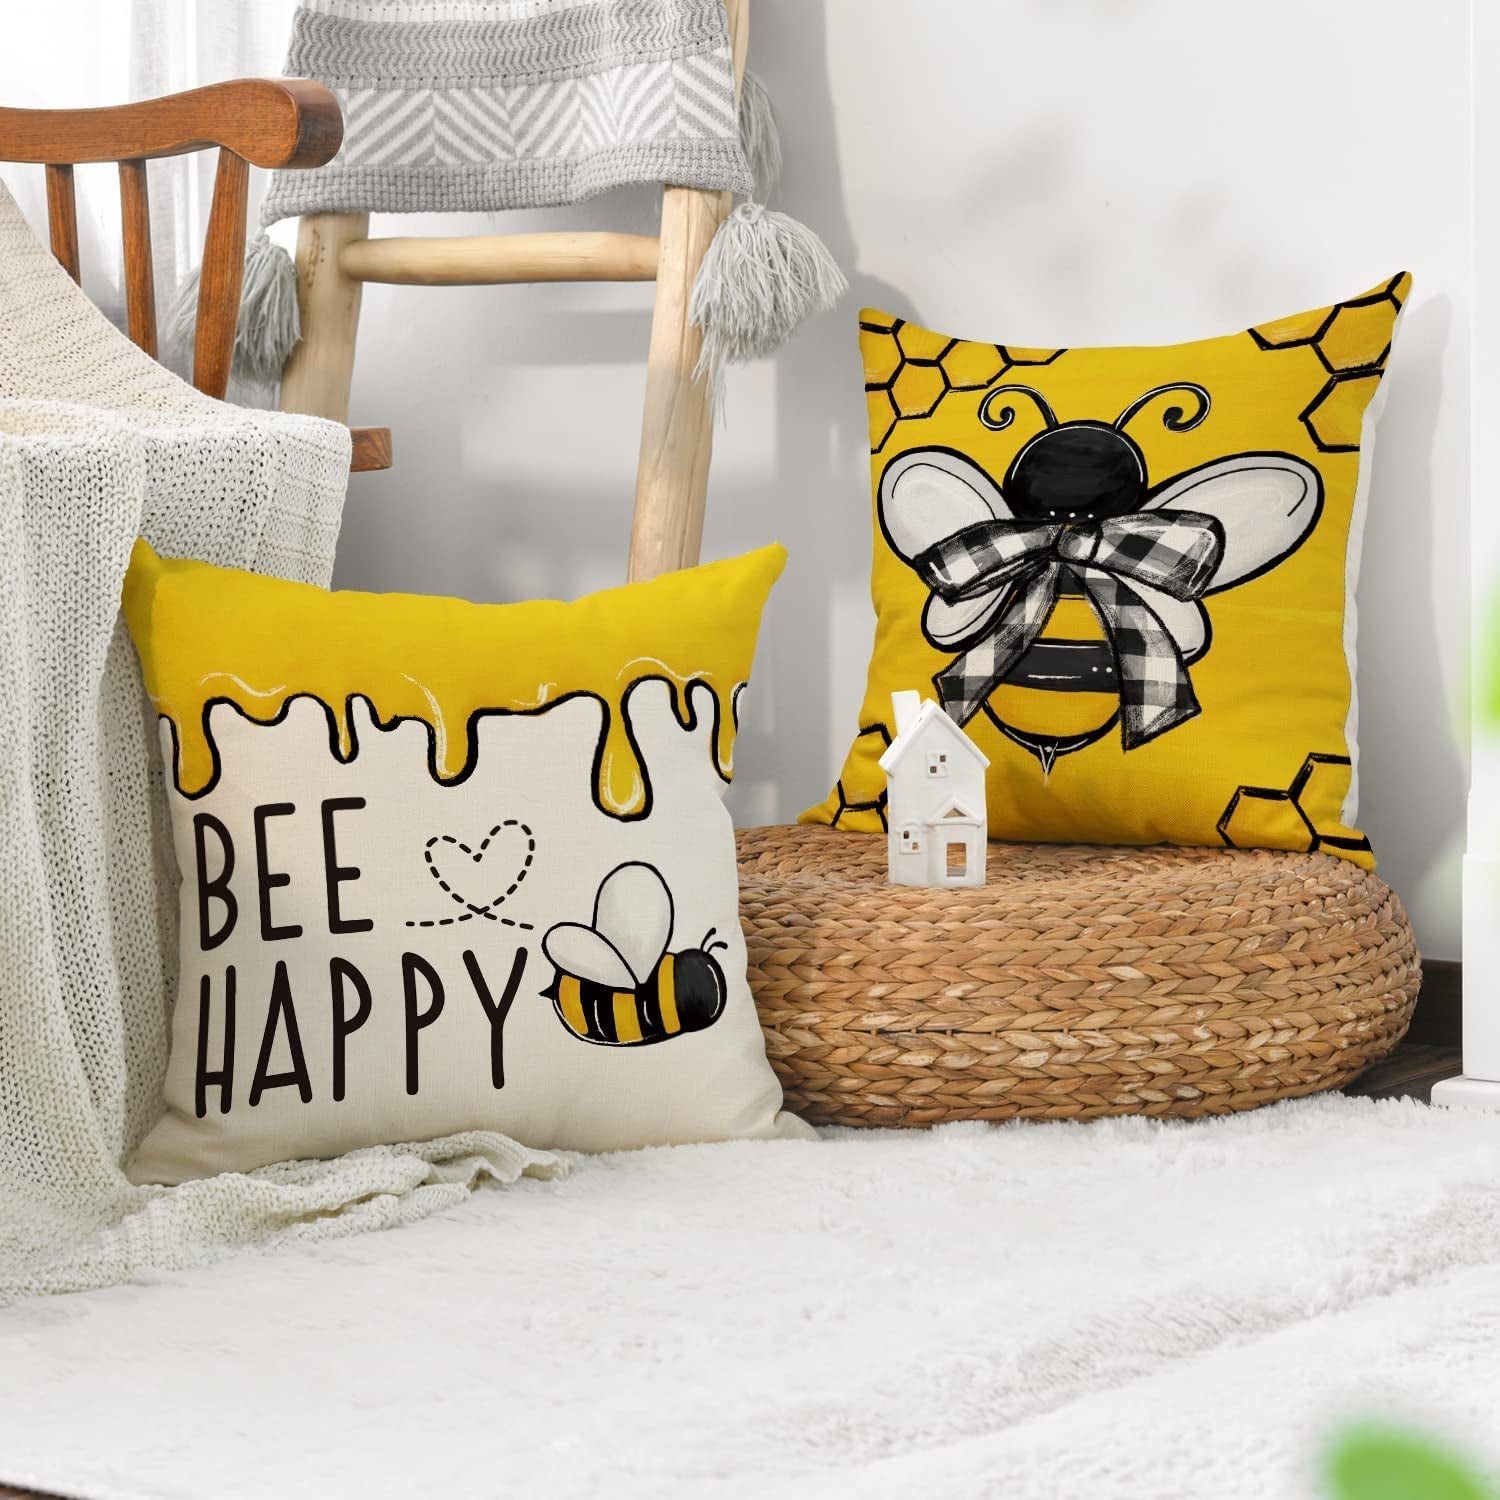 AVOIN Colorlife Bee Happy Bee Kind Throw Pillow Covers, 18 X 18 Inch Honey and Bee Summer Cushion Case Decoration for Sofa Couch Set of 4